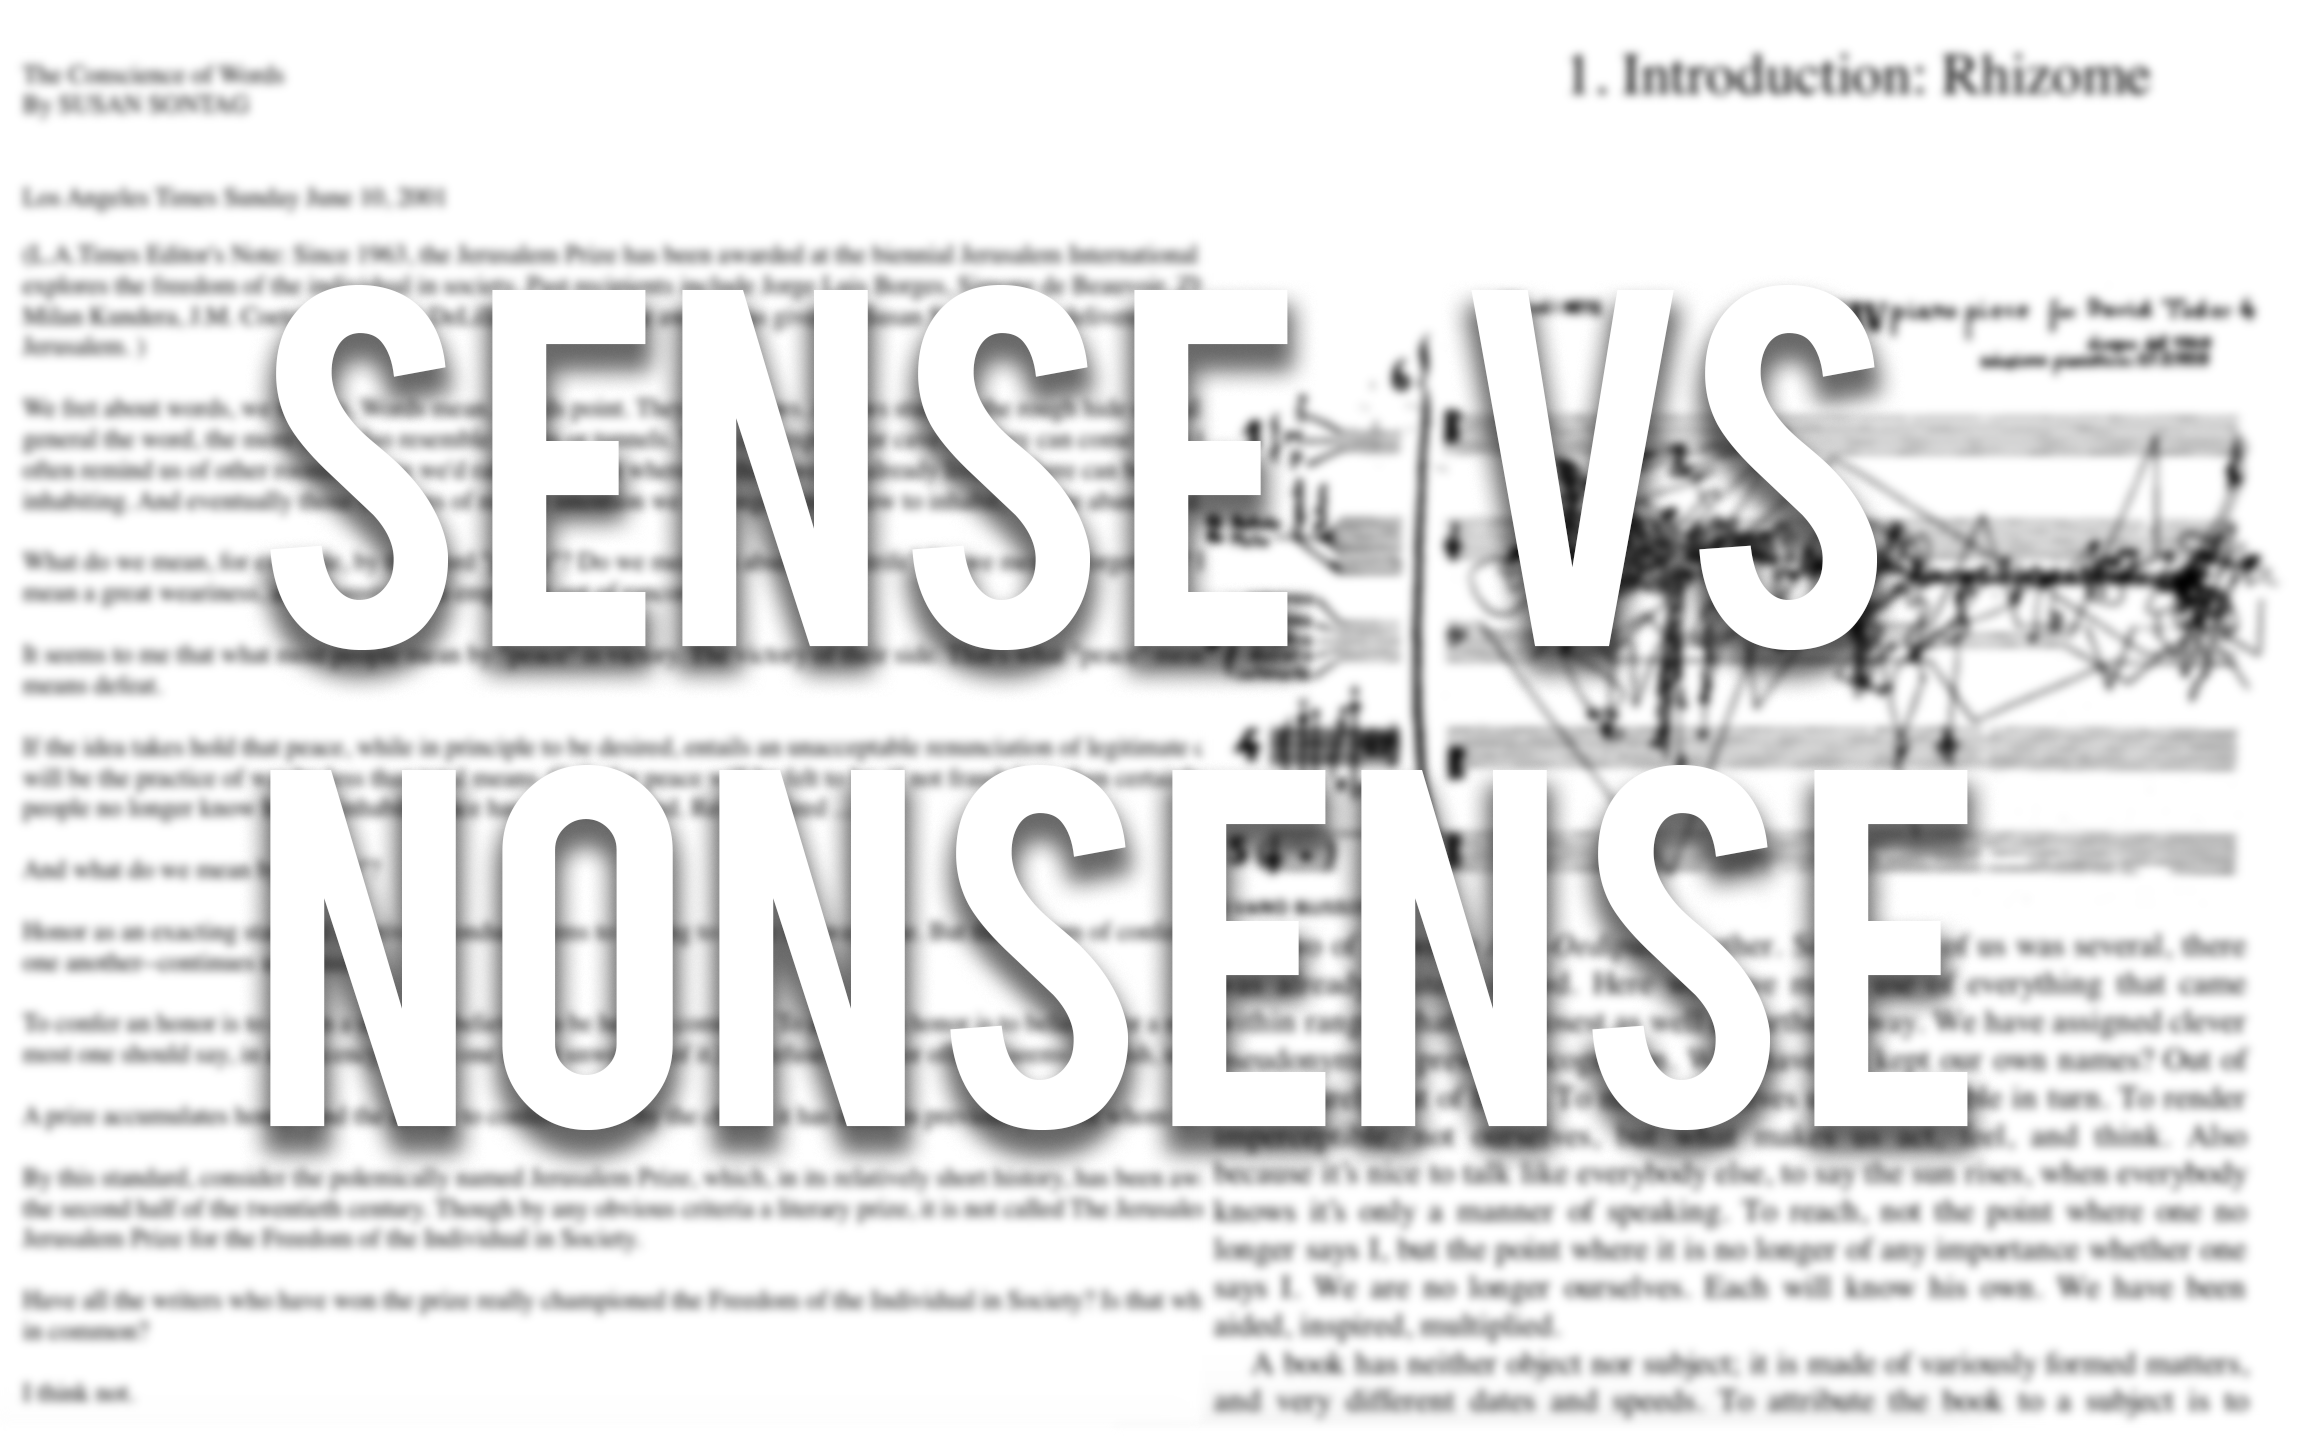 Sense/Nonsense: “The Conscience of Words” and “Introduction: Rhizome”